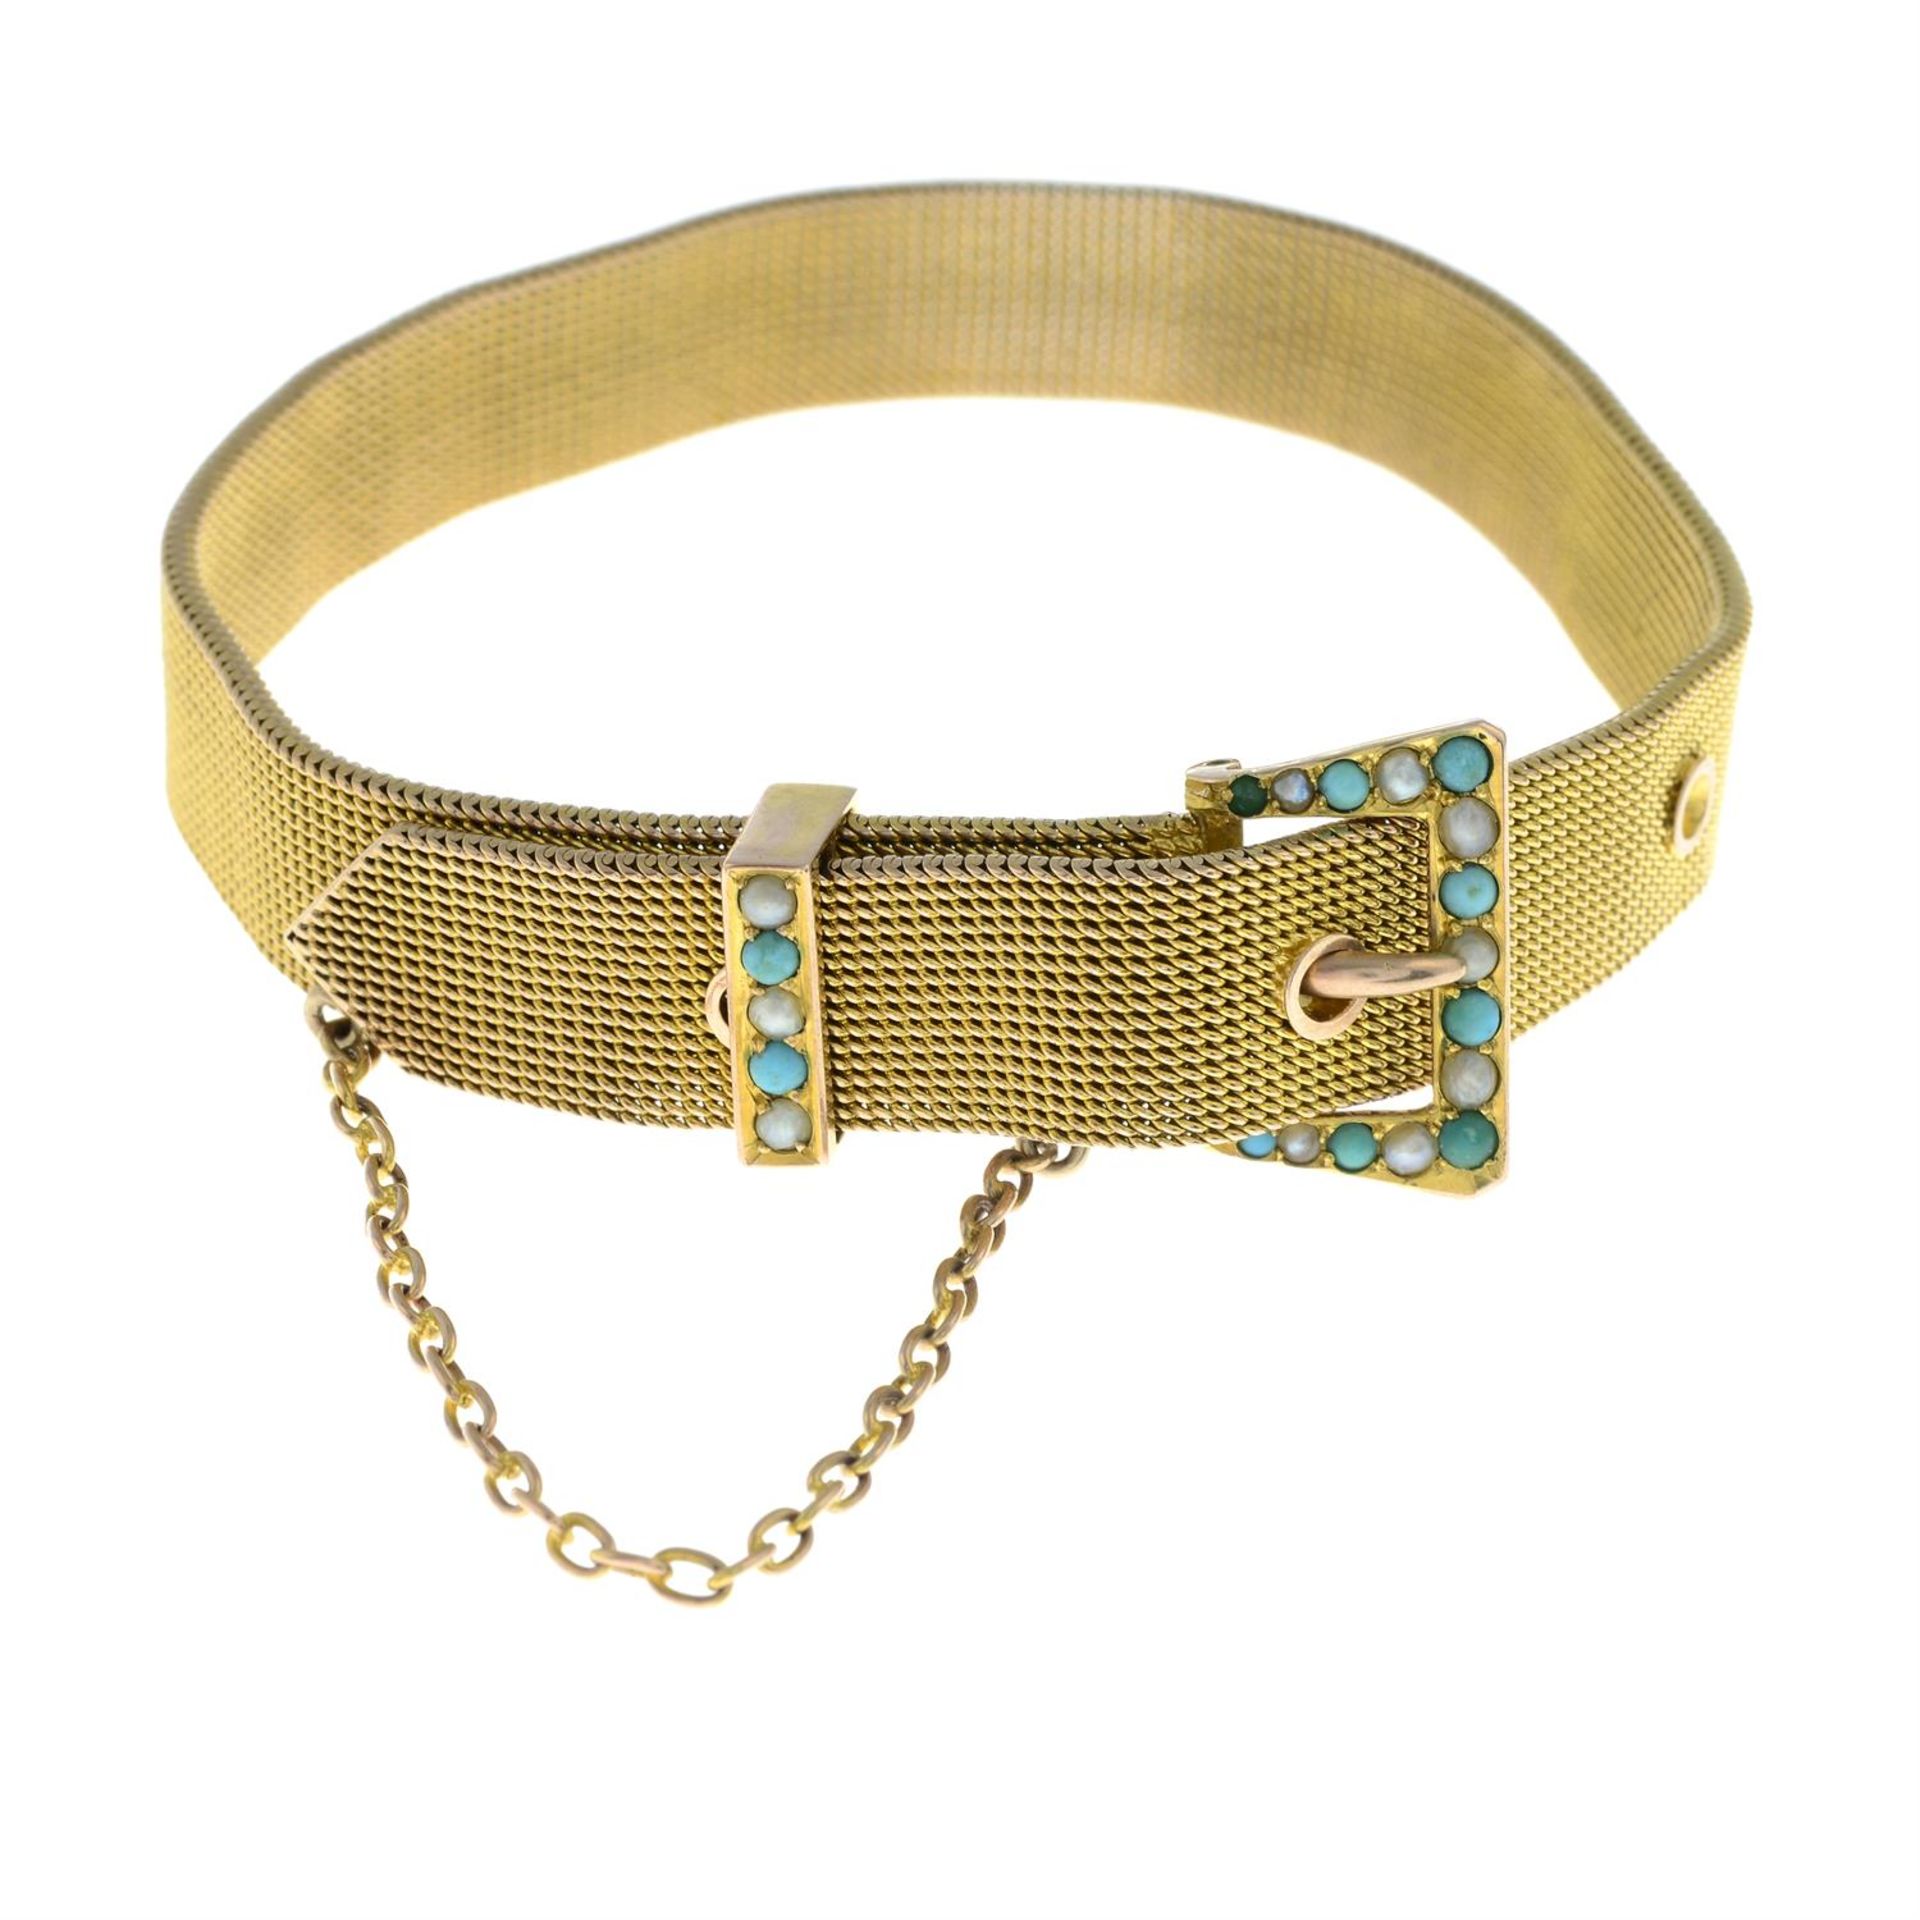 An early 20th century 9ct gold mesh buckle bracelet, with turquoise and split pearl highlights. - Image 2 of 3